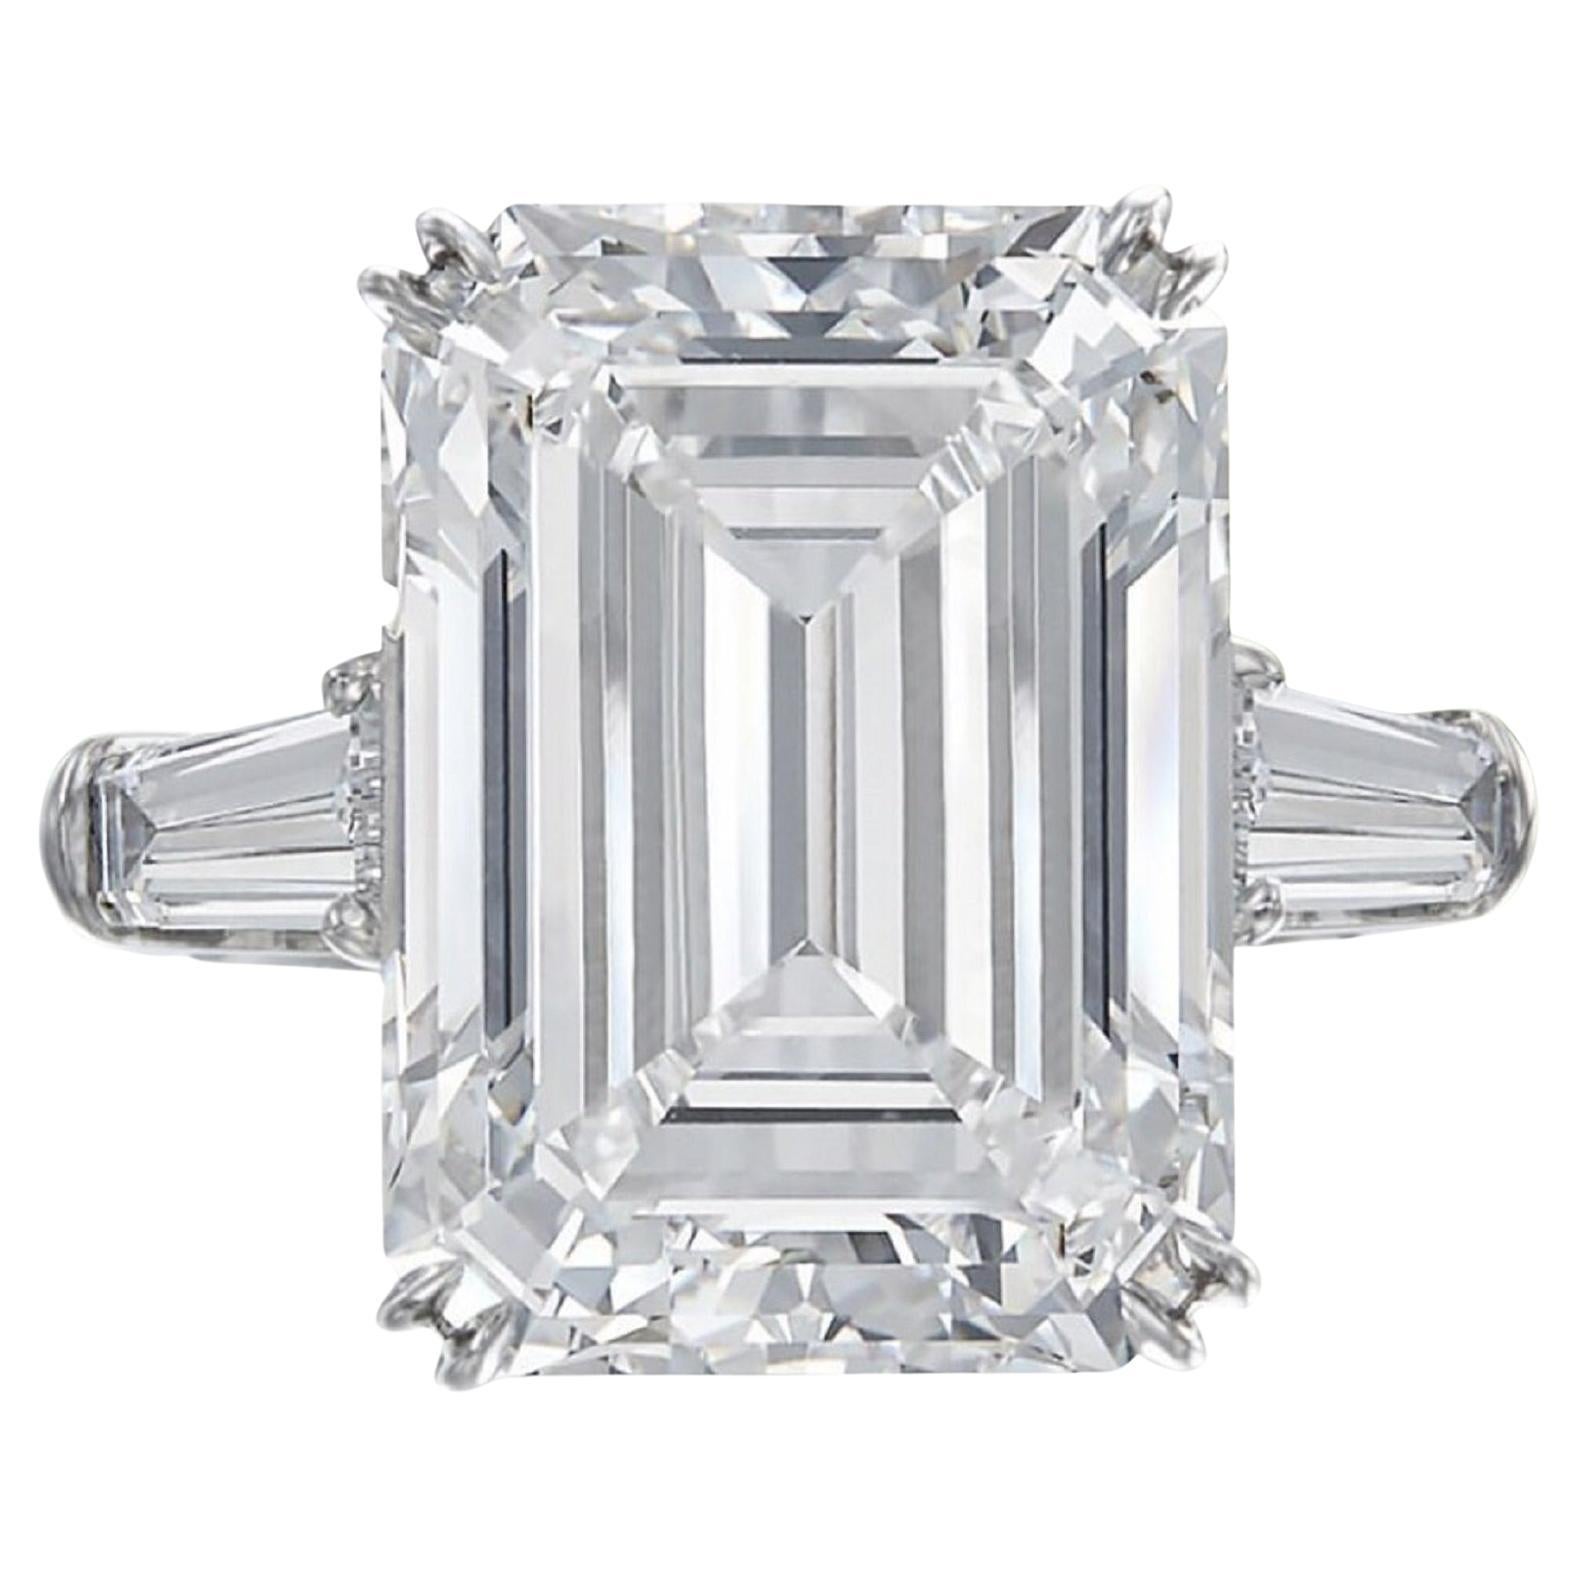 FLAWLESS Exceptional GIA Certified 10 Carat Emerald Cut Diamond Solitaire Ring 